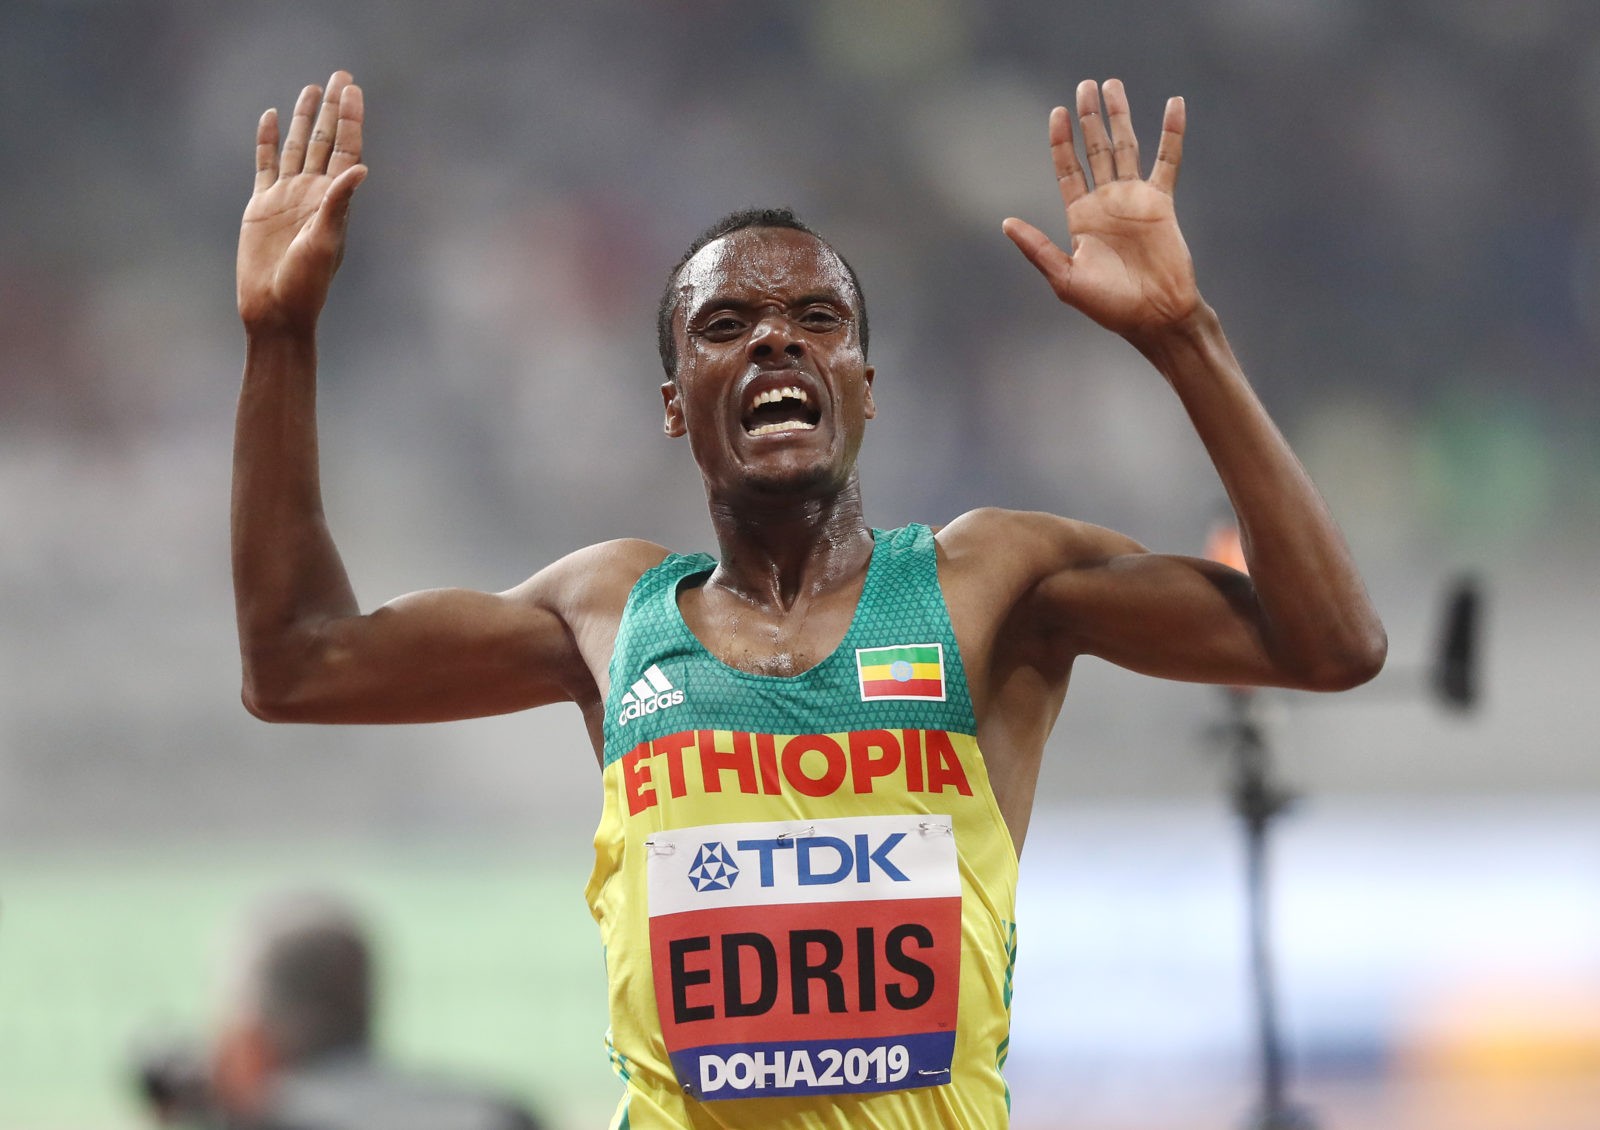 Muktar Edris of Ethiopia celebrates winning gold in the Men's 5000 metres final during day four of 17th IAAF World Athletics Championships Doha 2019 at Khalifa International Stadium on September 30, 2019 in Doha, Qatar. (Photo by Alexander Hassenstein/Getty Images for IAAF)